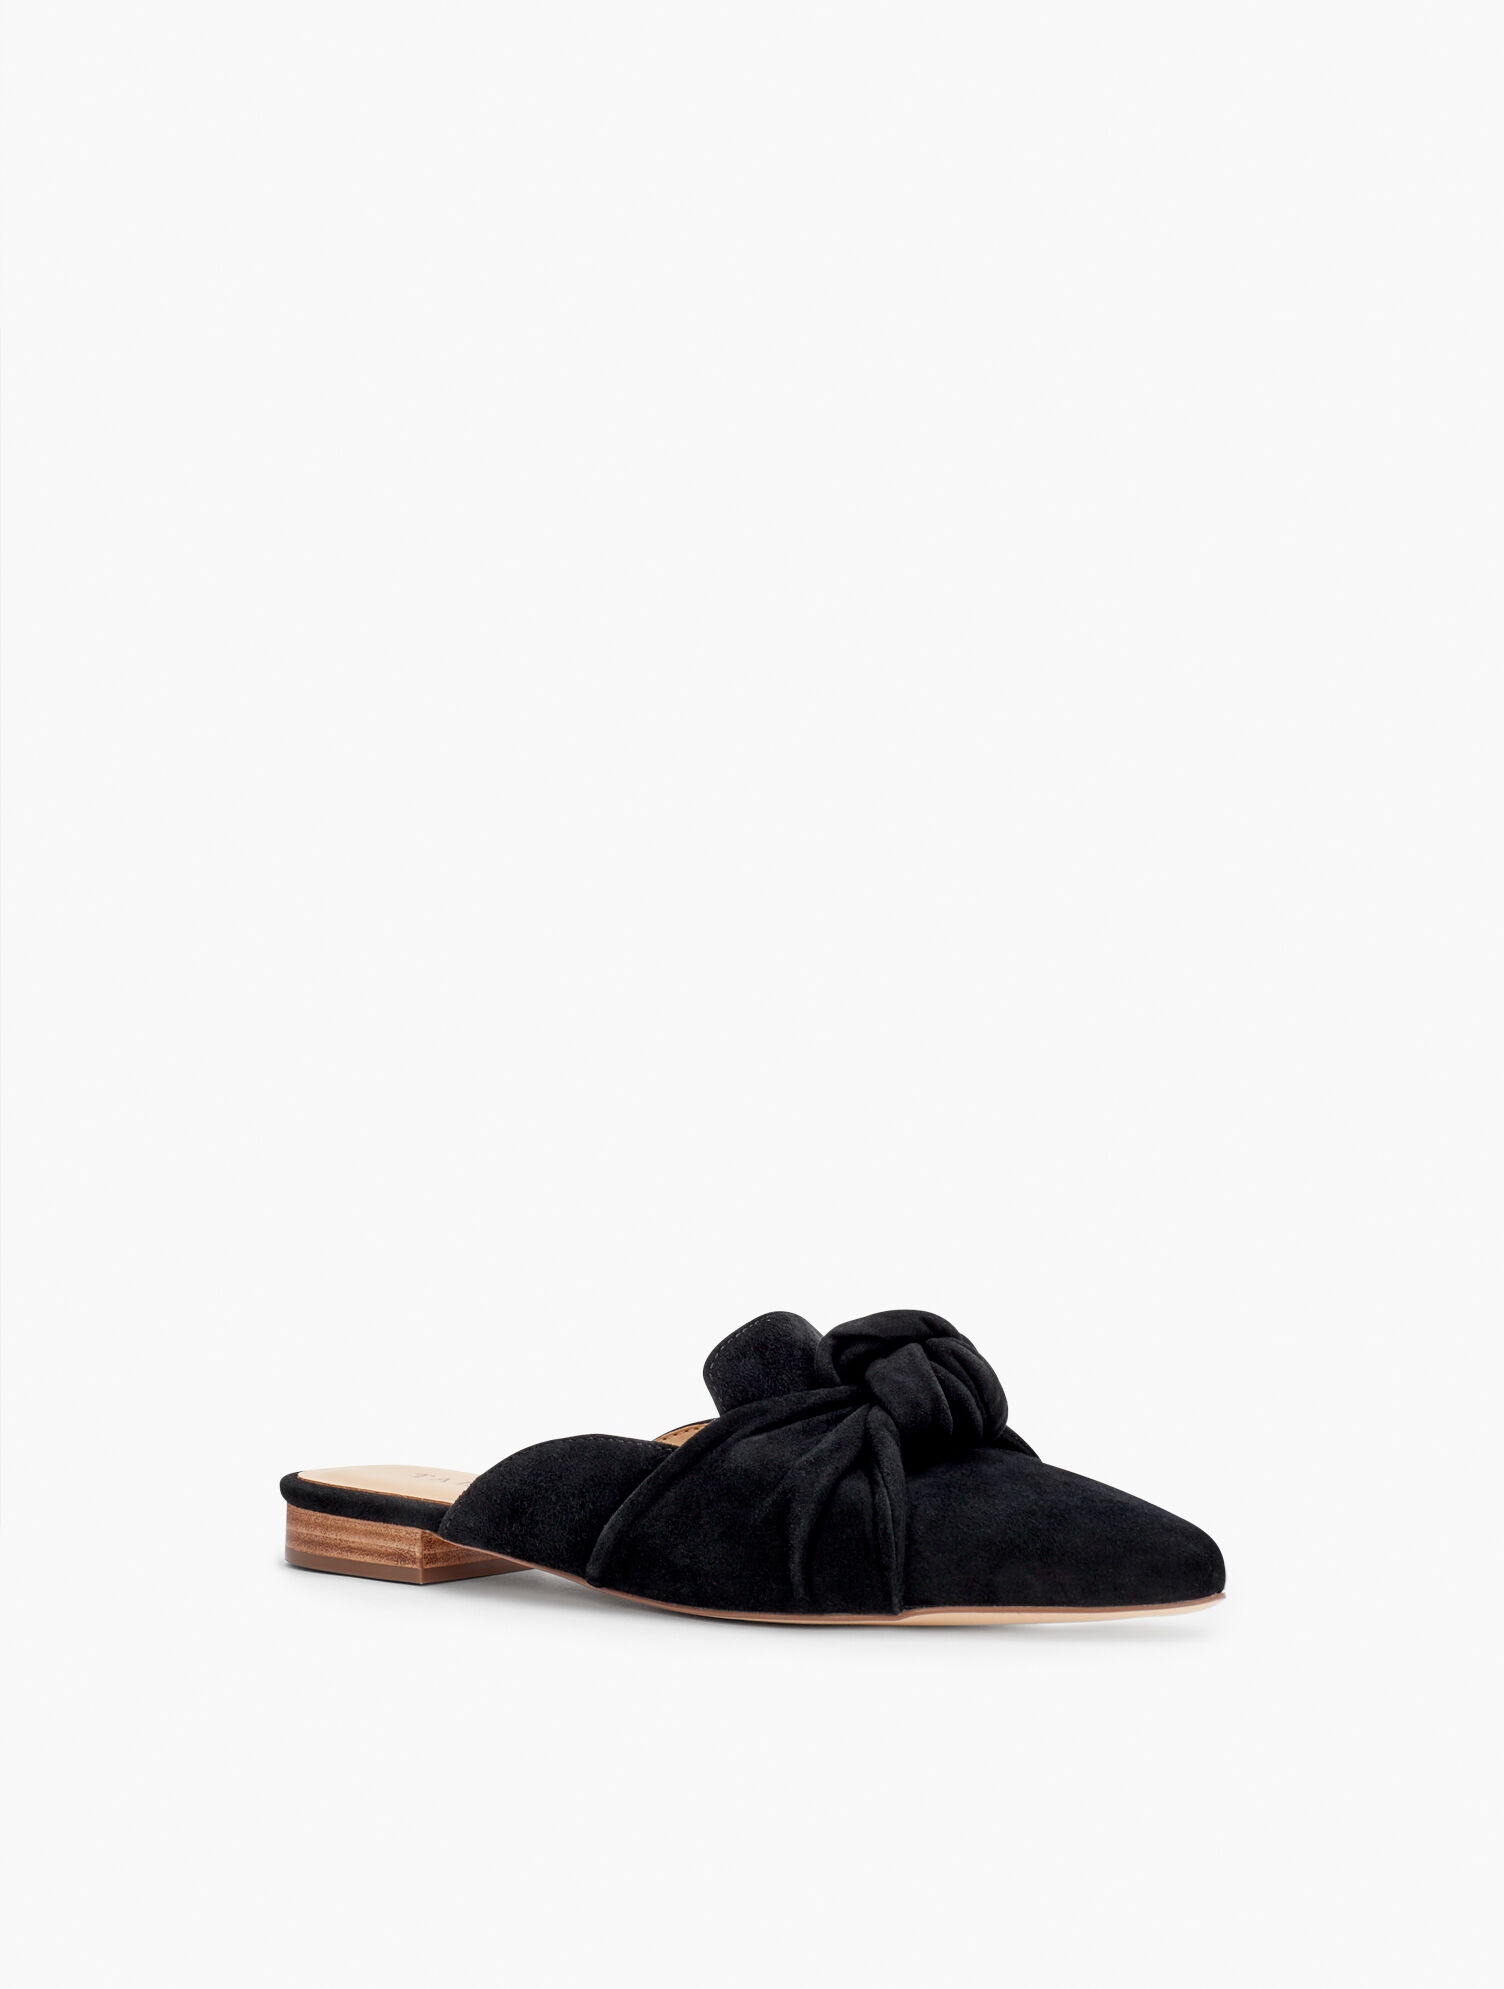 Edison Knot Detail Mules - Suede | Talbots